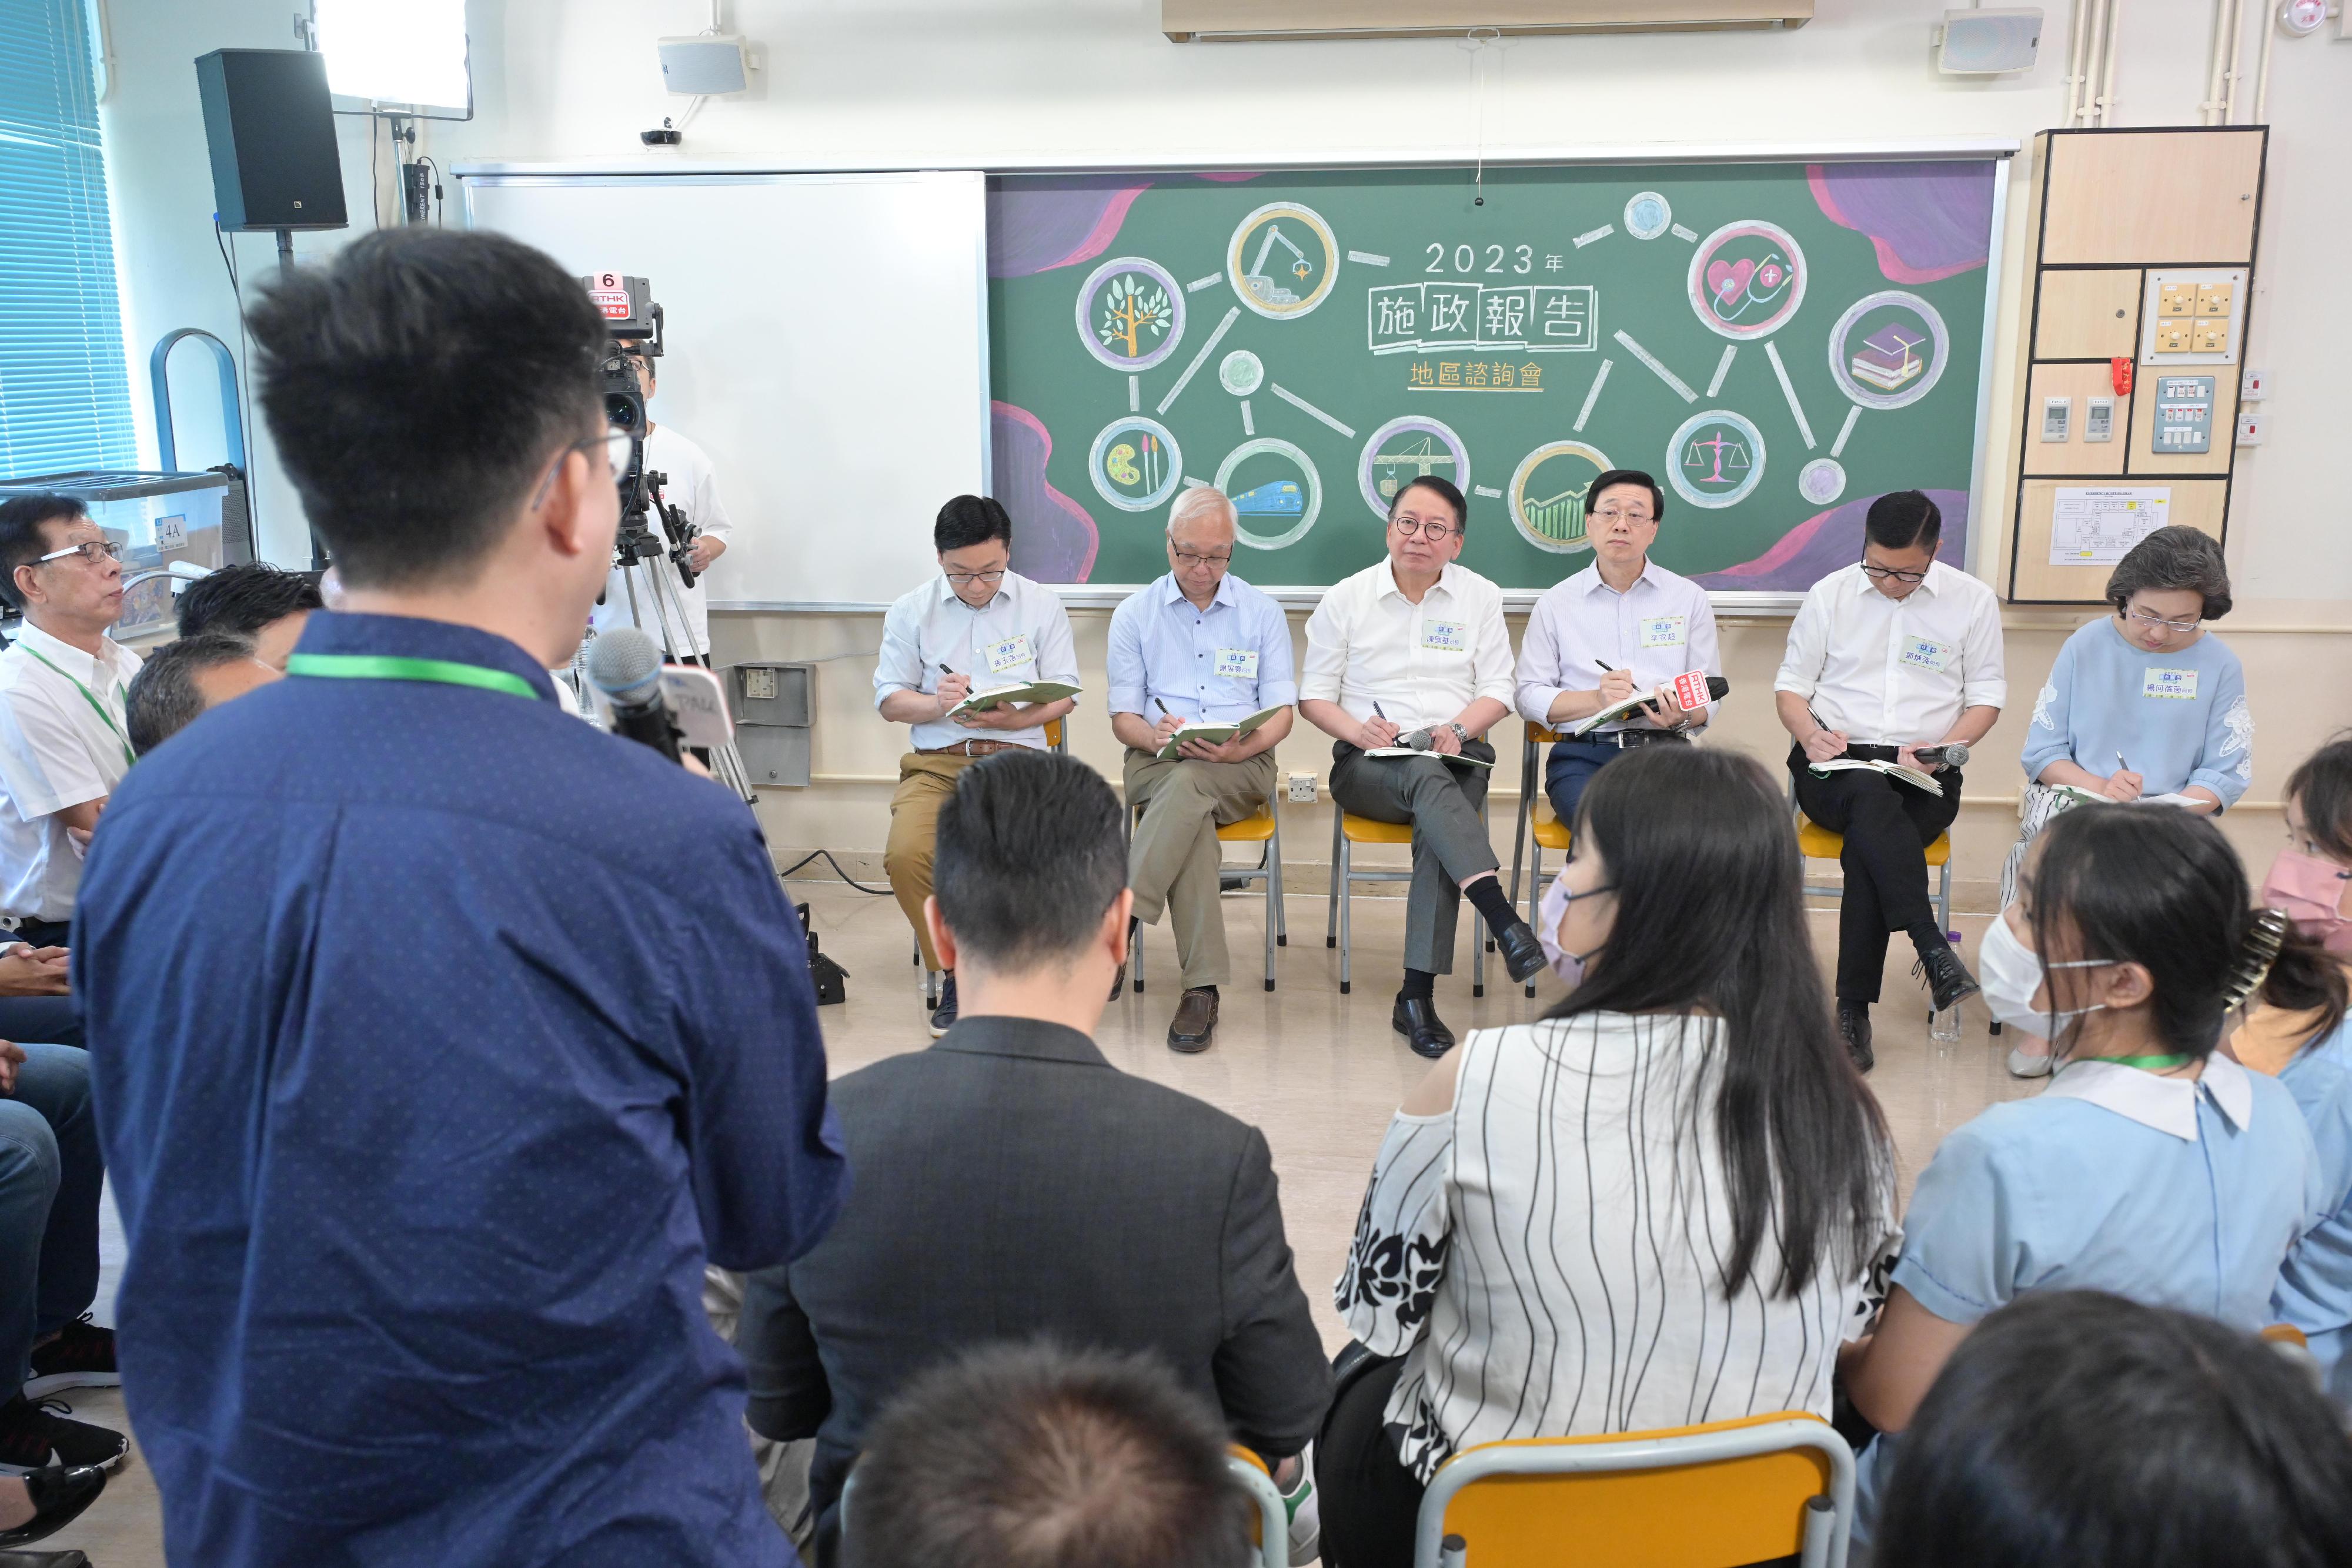 The Chief Executive, Mr John Lee, attended the second 2023 Policy Address District Forum with Principal Officials this morning (August 27) to listen to views and suggestions of local community members on the upcoming Policy Address. Photo shows Mr Lee (third right); the Chief Secretary for Administration, Mr Chan Kwok-ki (third left); the Secretary for Security, Mr Tang Ping-keung (second right); the Secretary for Environment and Ecology, Mr Tse Chin-wan (second left); the Secretary for the Civil Service, Mrs Ingrid Yeung (first right); and the Secretary for Labour and Welfare, Mr Chris Sun (first left), listening to views of the public at the consultation session.